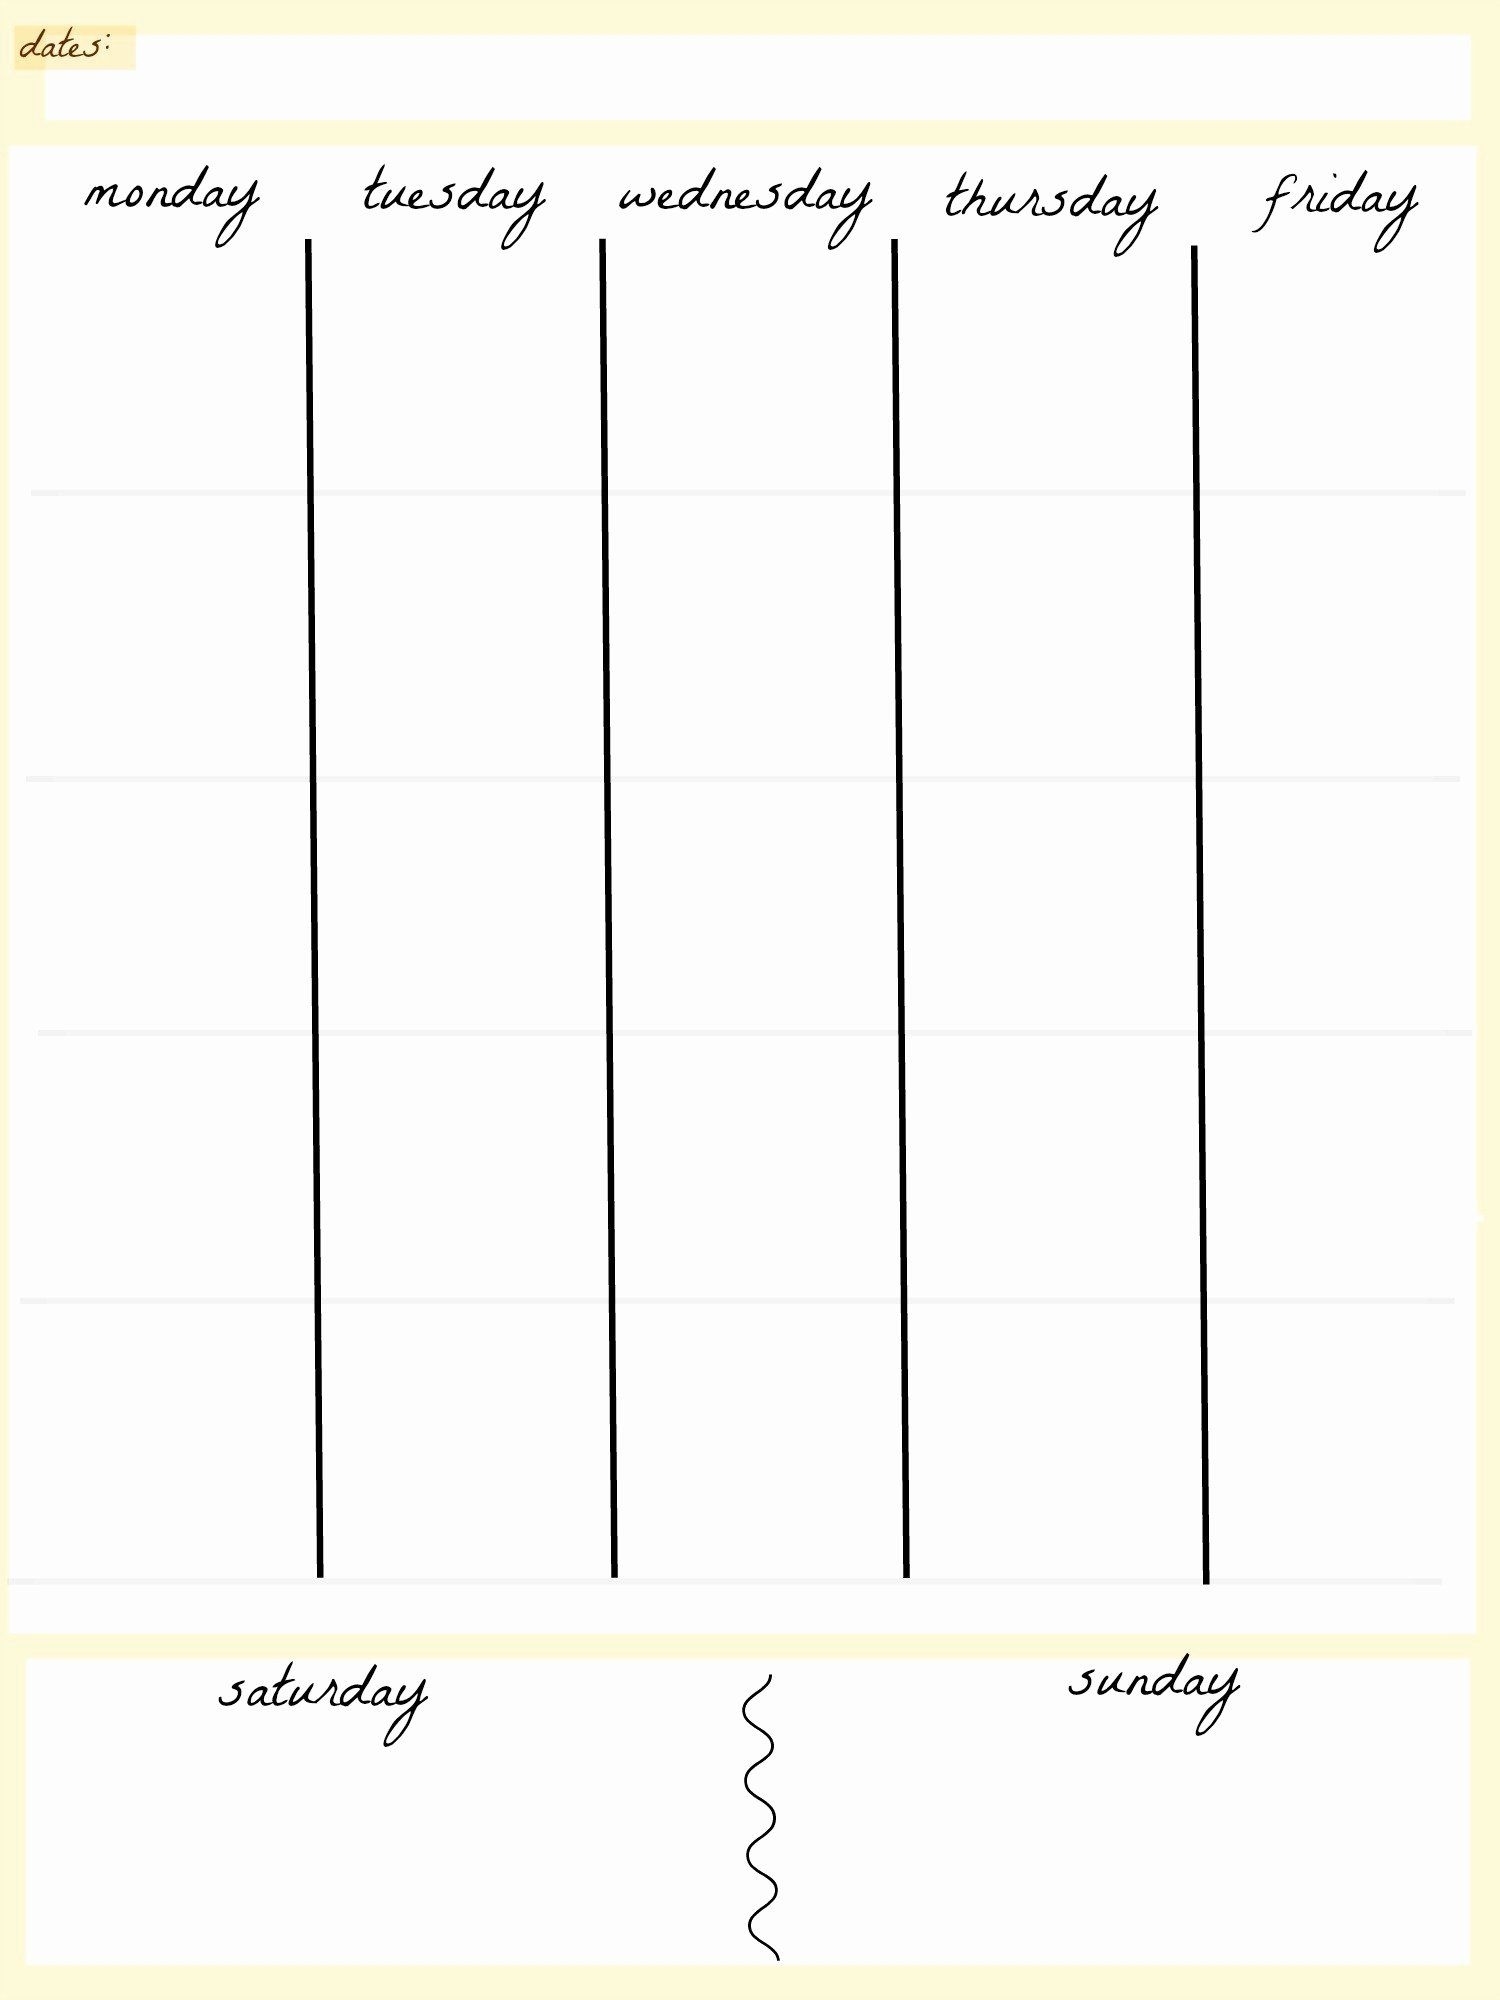 5 Day Schedule Template Lovely 5 Day Work Week Monthly 5 Day Work Calendar Template